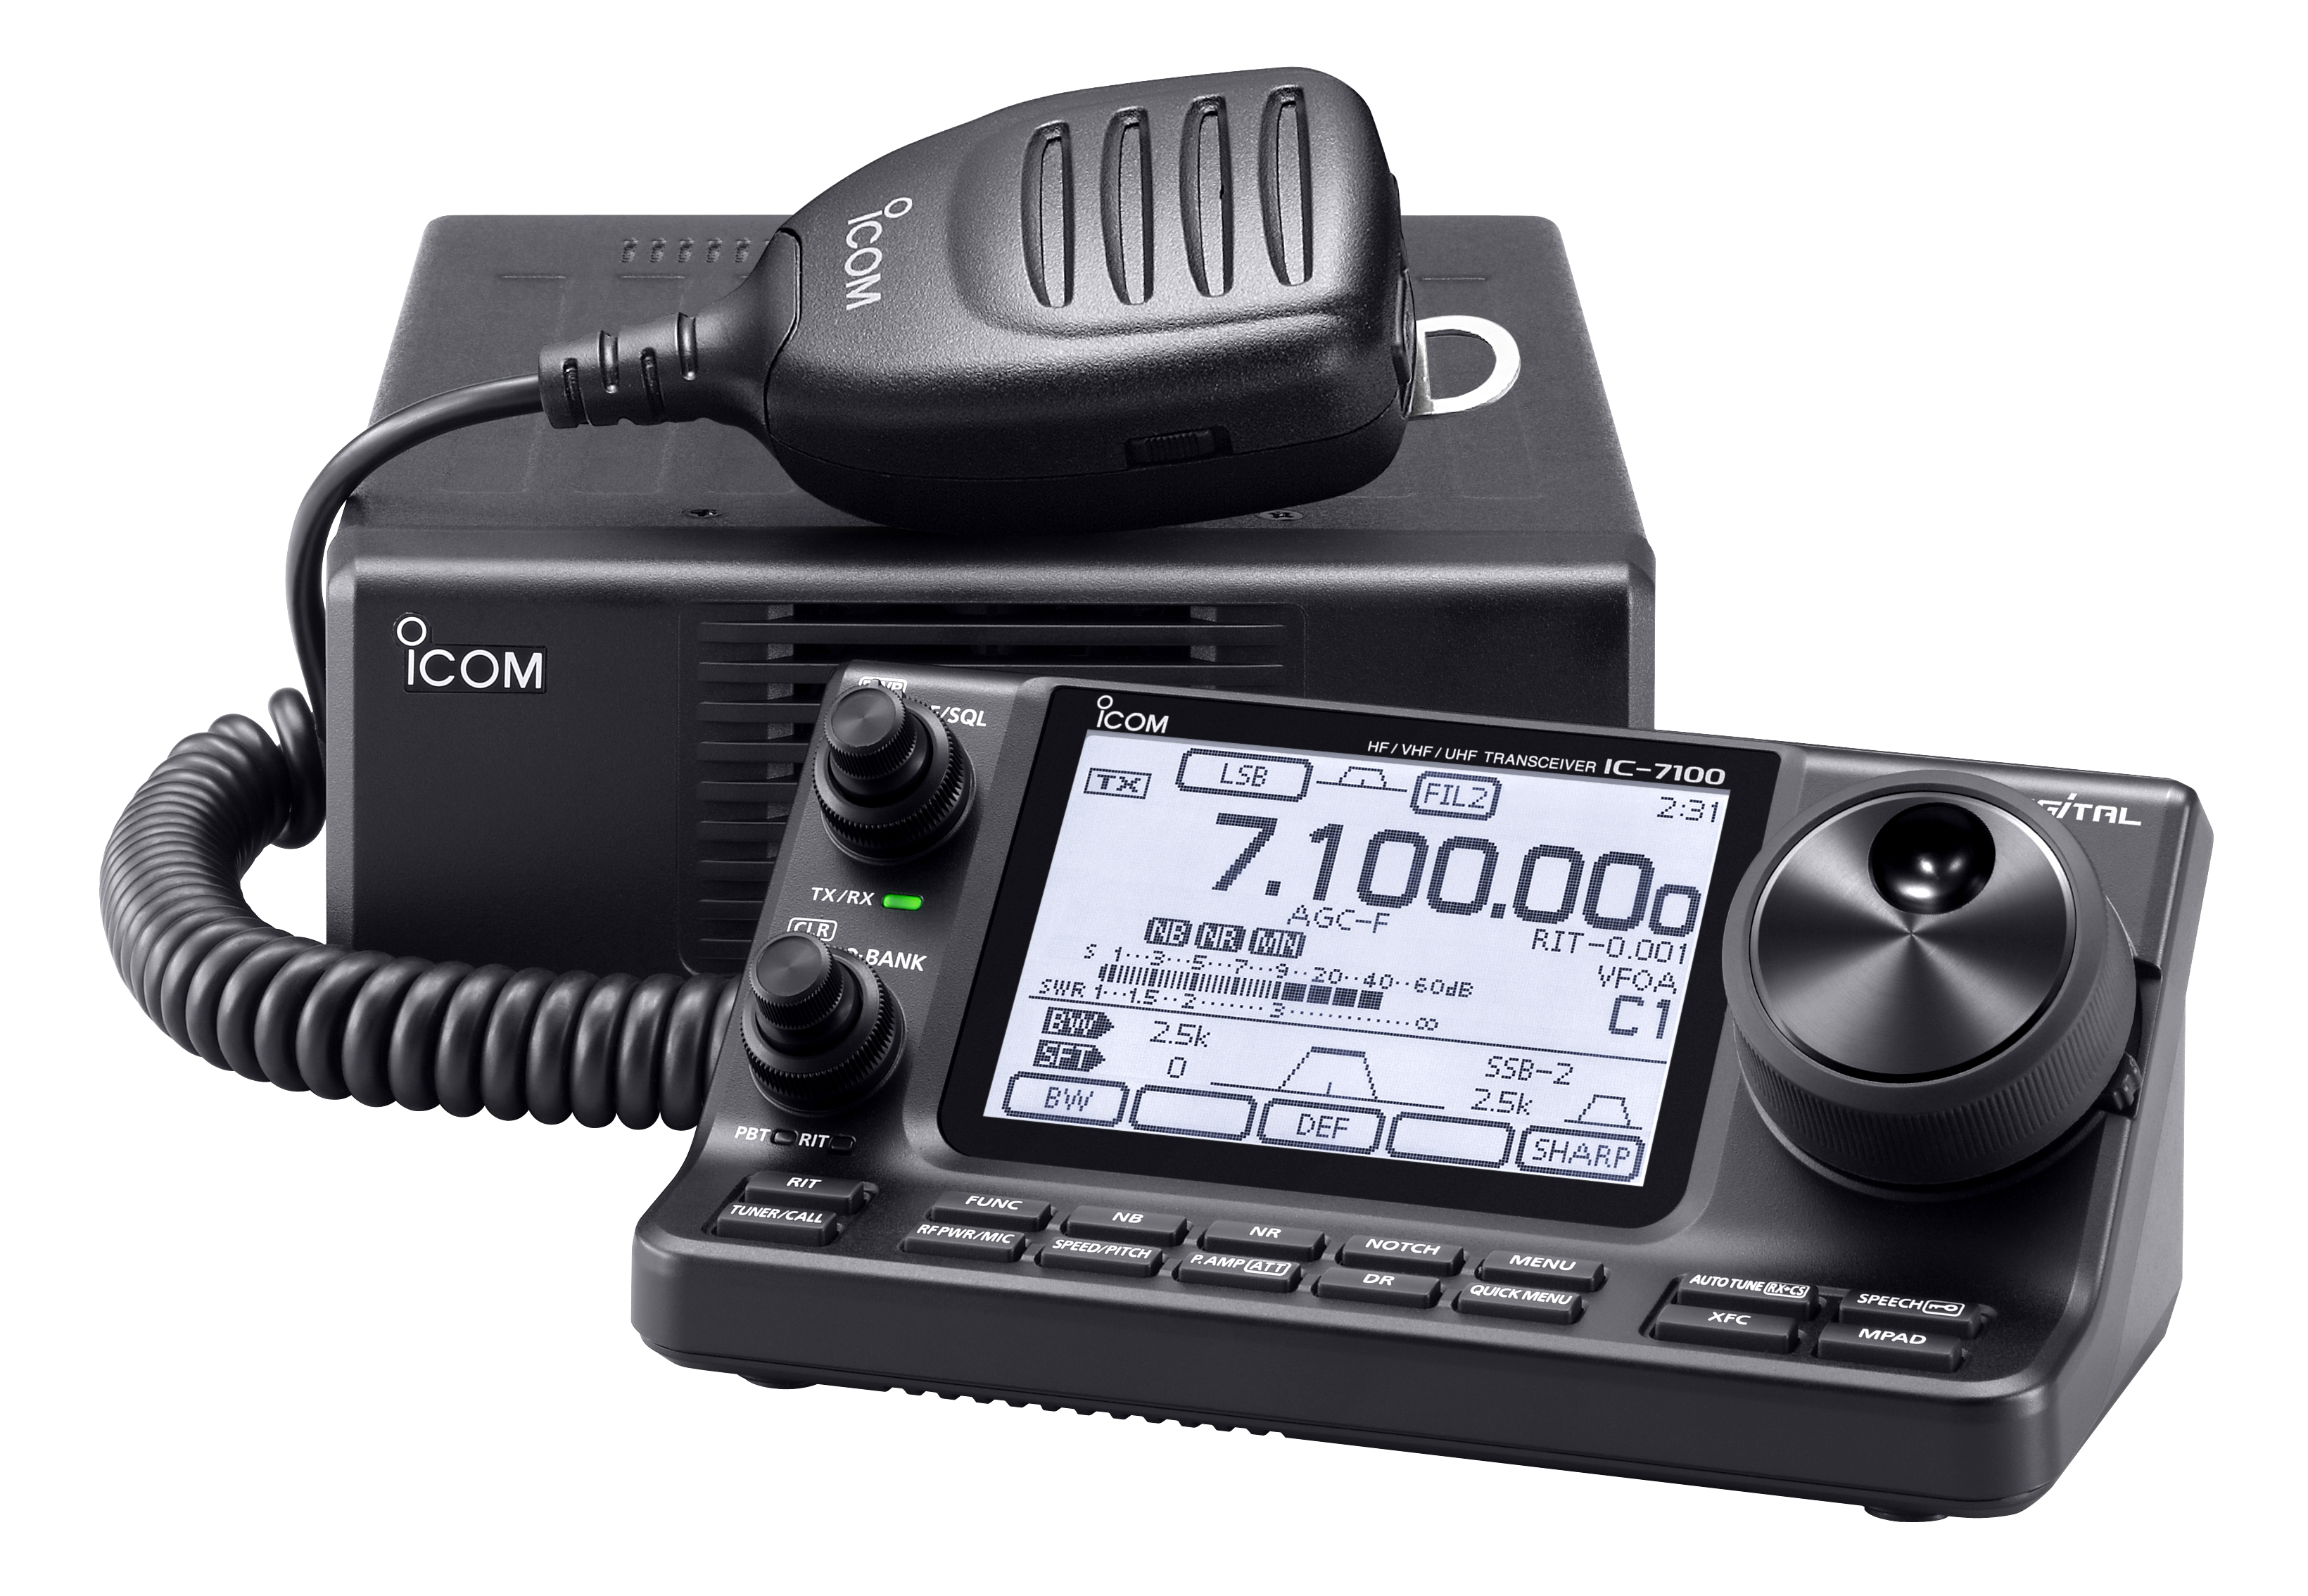 The new IC-7100